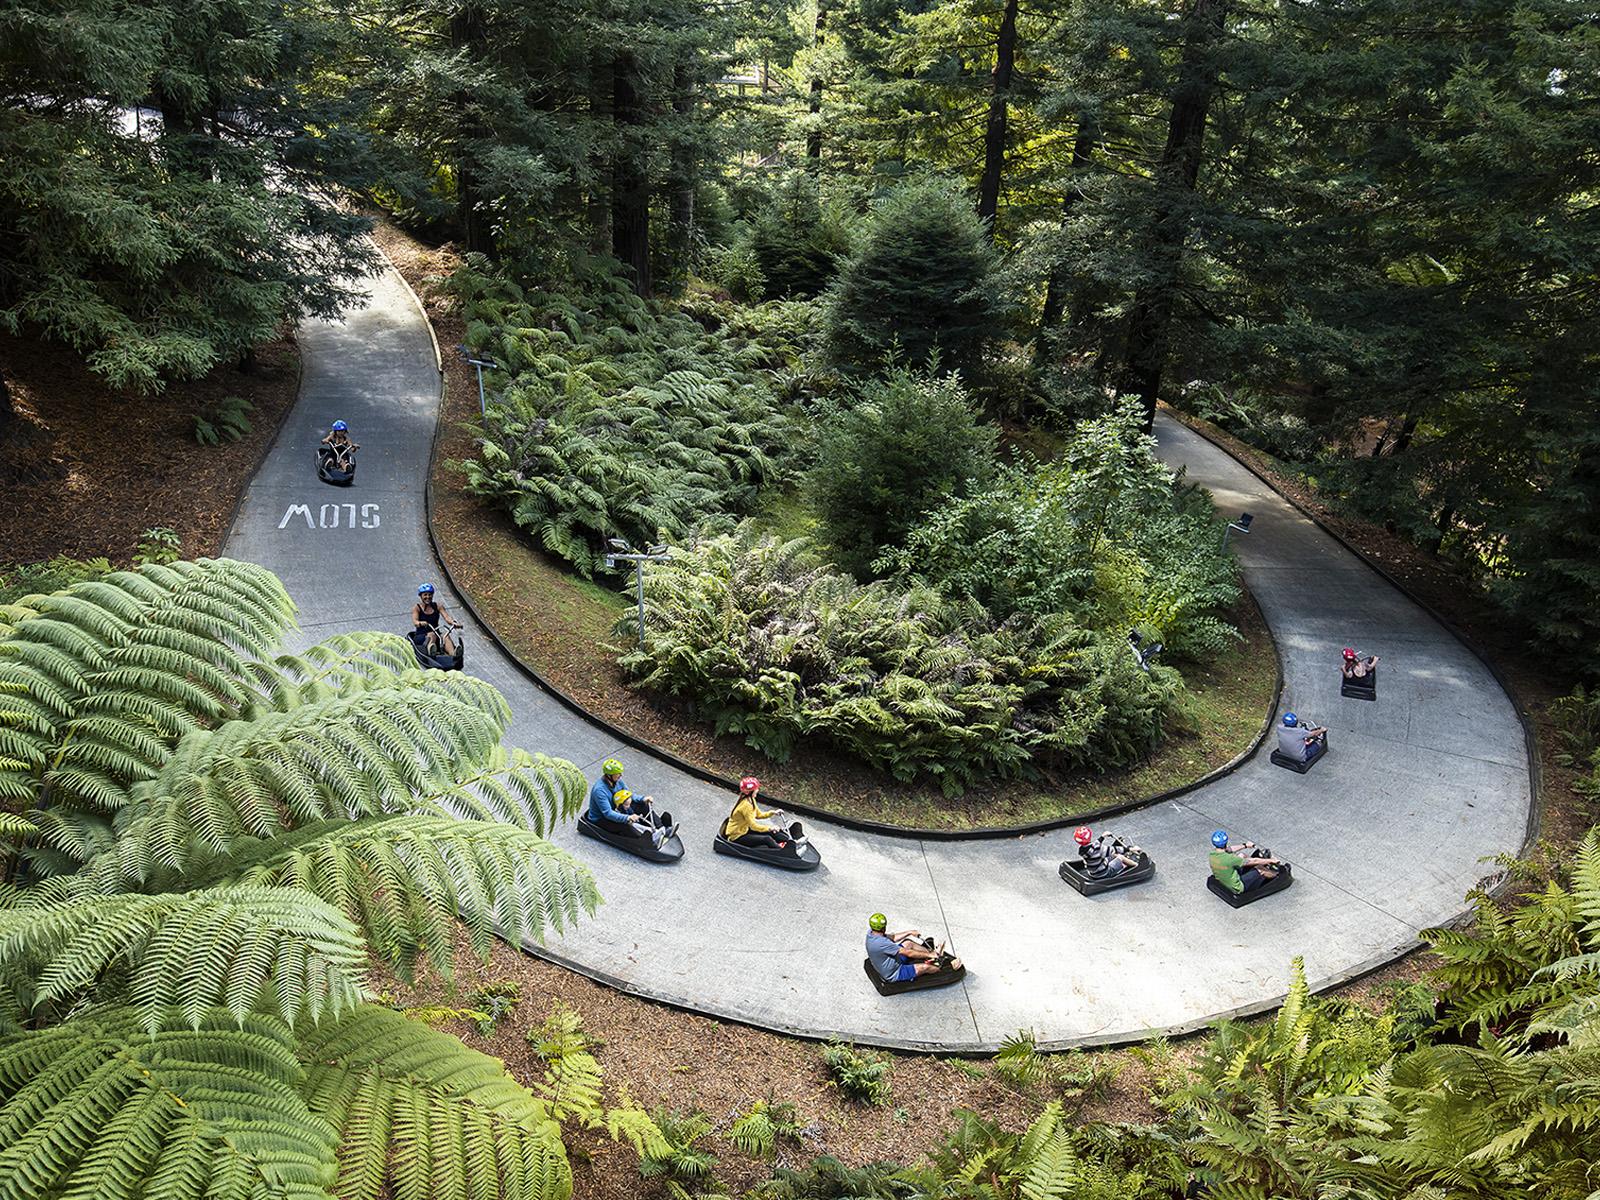 Half aerial shot of the luge track with riders going down through the forest